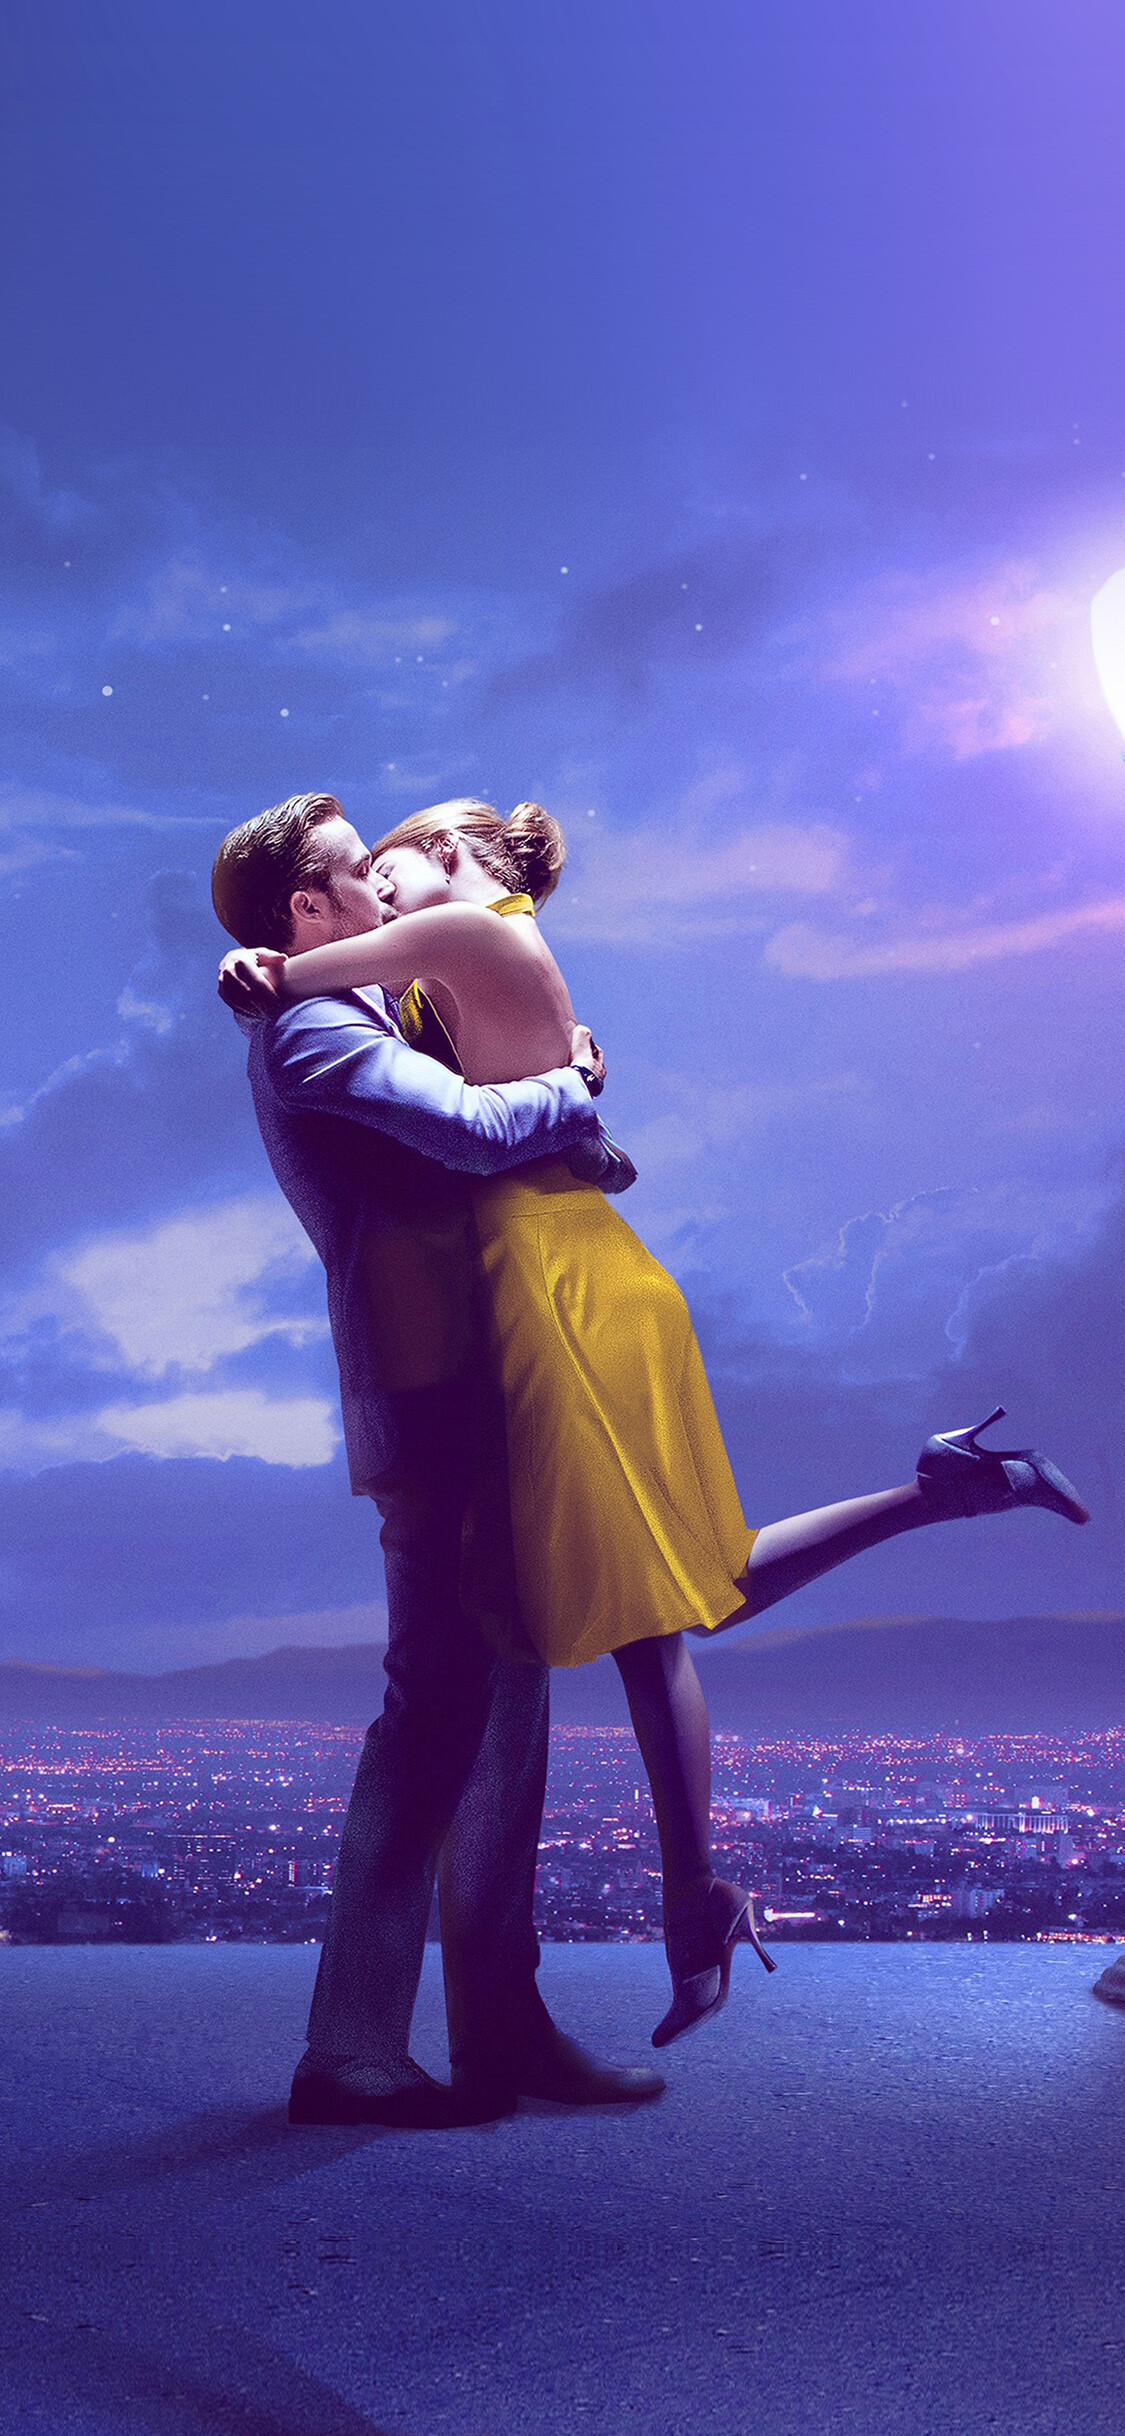 La La Land: The film received widespread critical acclaim, with praise going toward Chazelle's screenplay and direction, cinematography, music, the performances of Gosling and Stone and their chemistry. 1130x2440 HD Wallpaper.